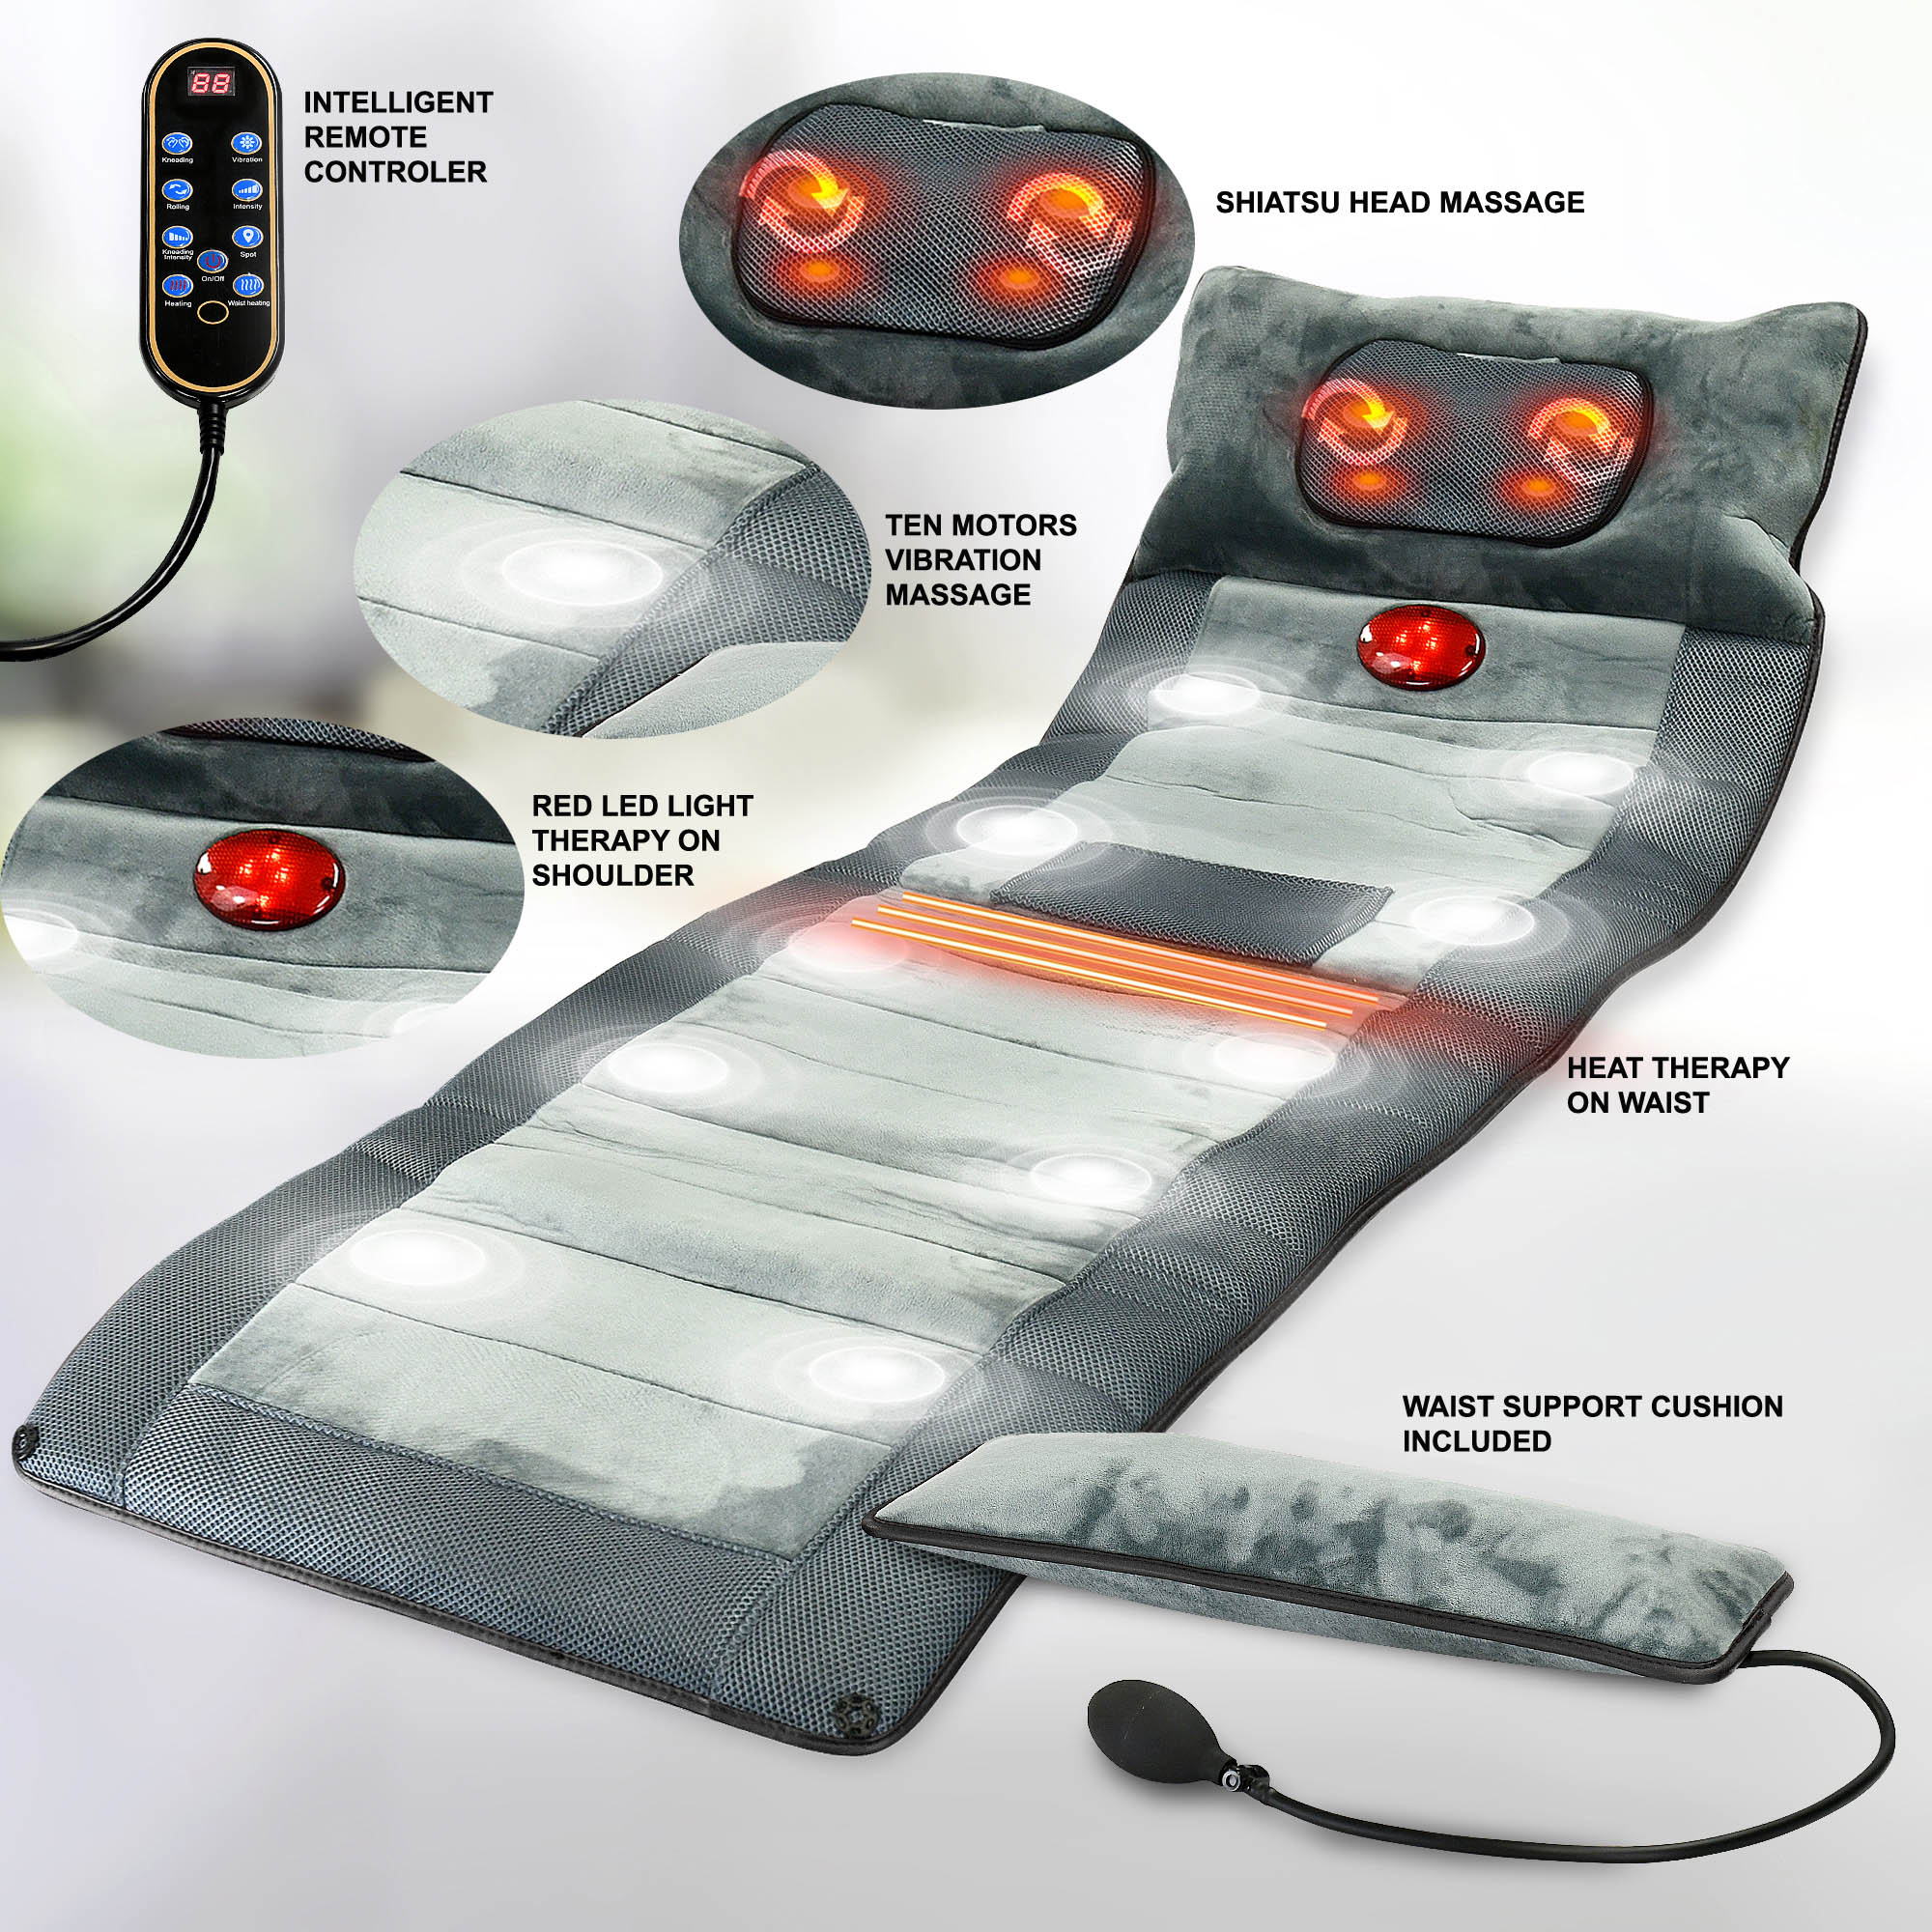 Shiatsu Gray Heated Seat Pad with Vibration Massage for Total Body Relief | - Carepeutic KH331